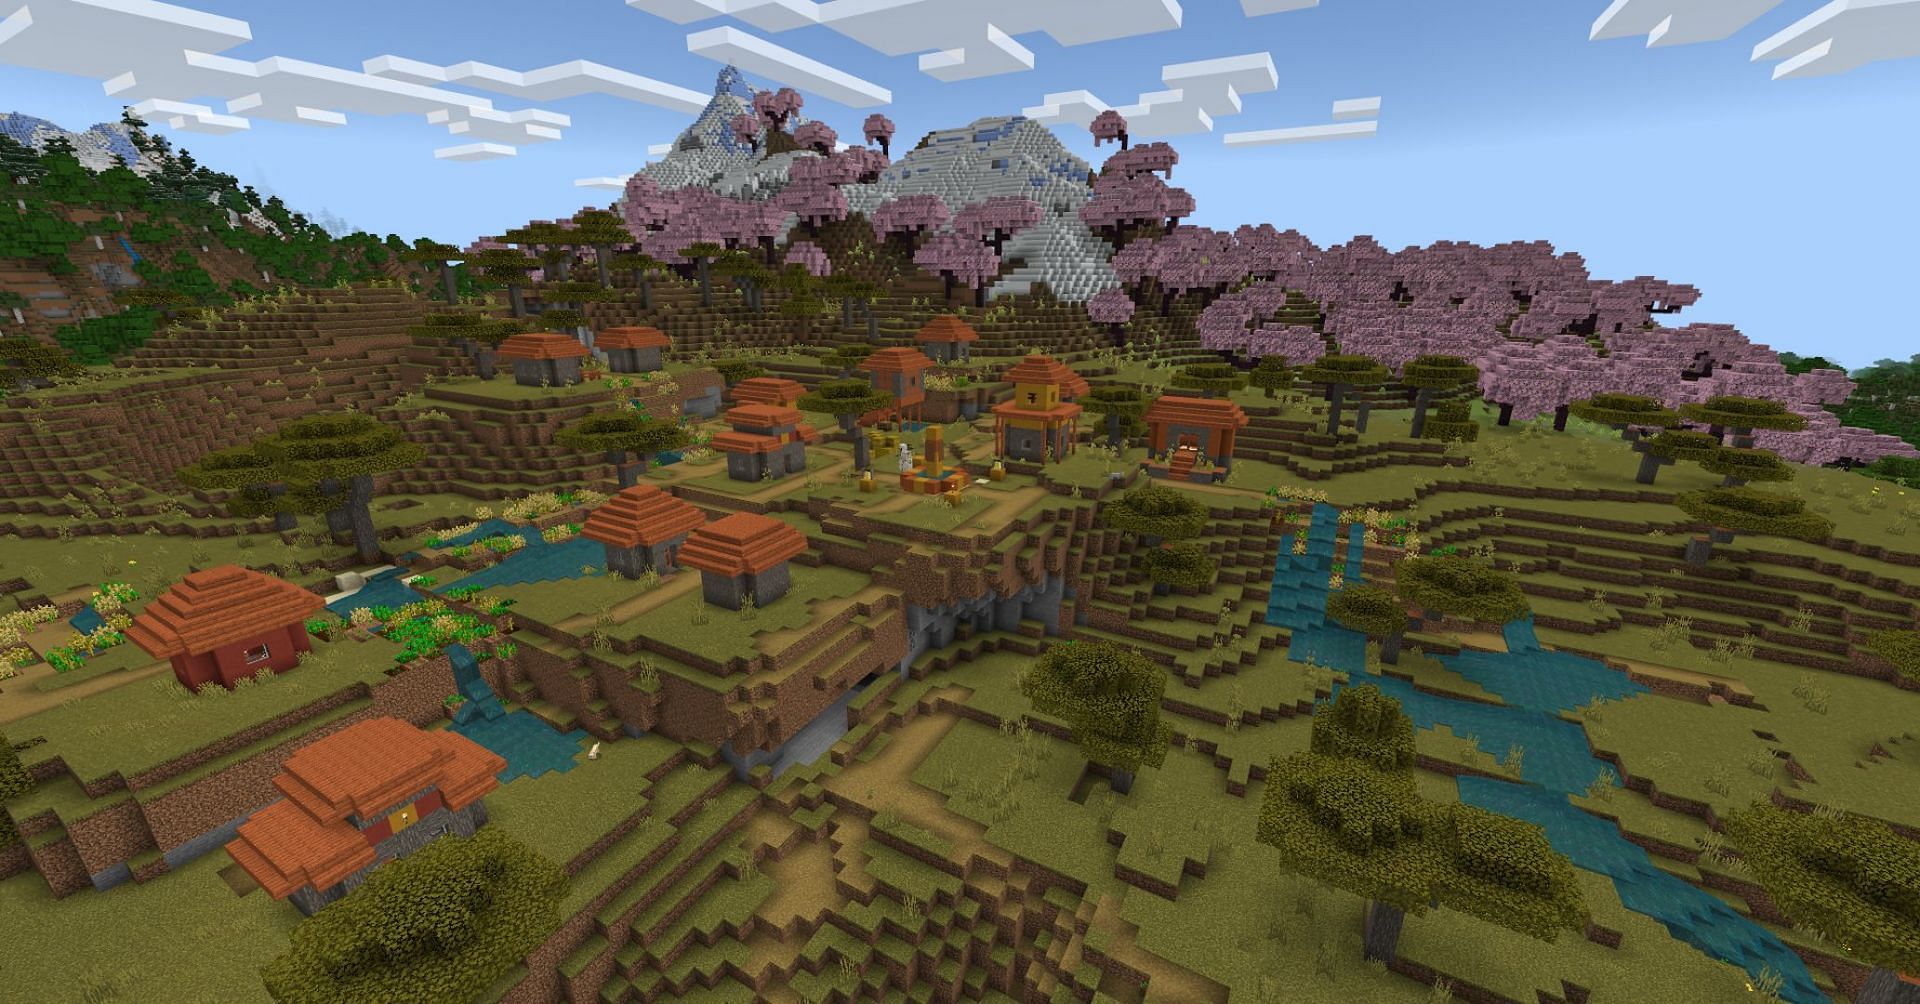 This scenic cherry village is almost directly above an ancient city (Image via Mojang)